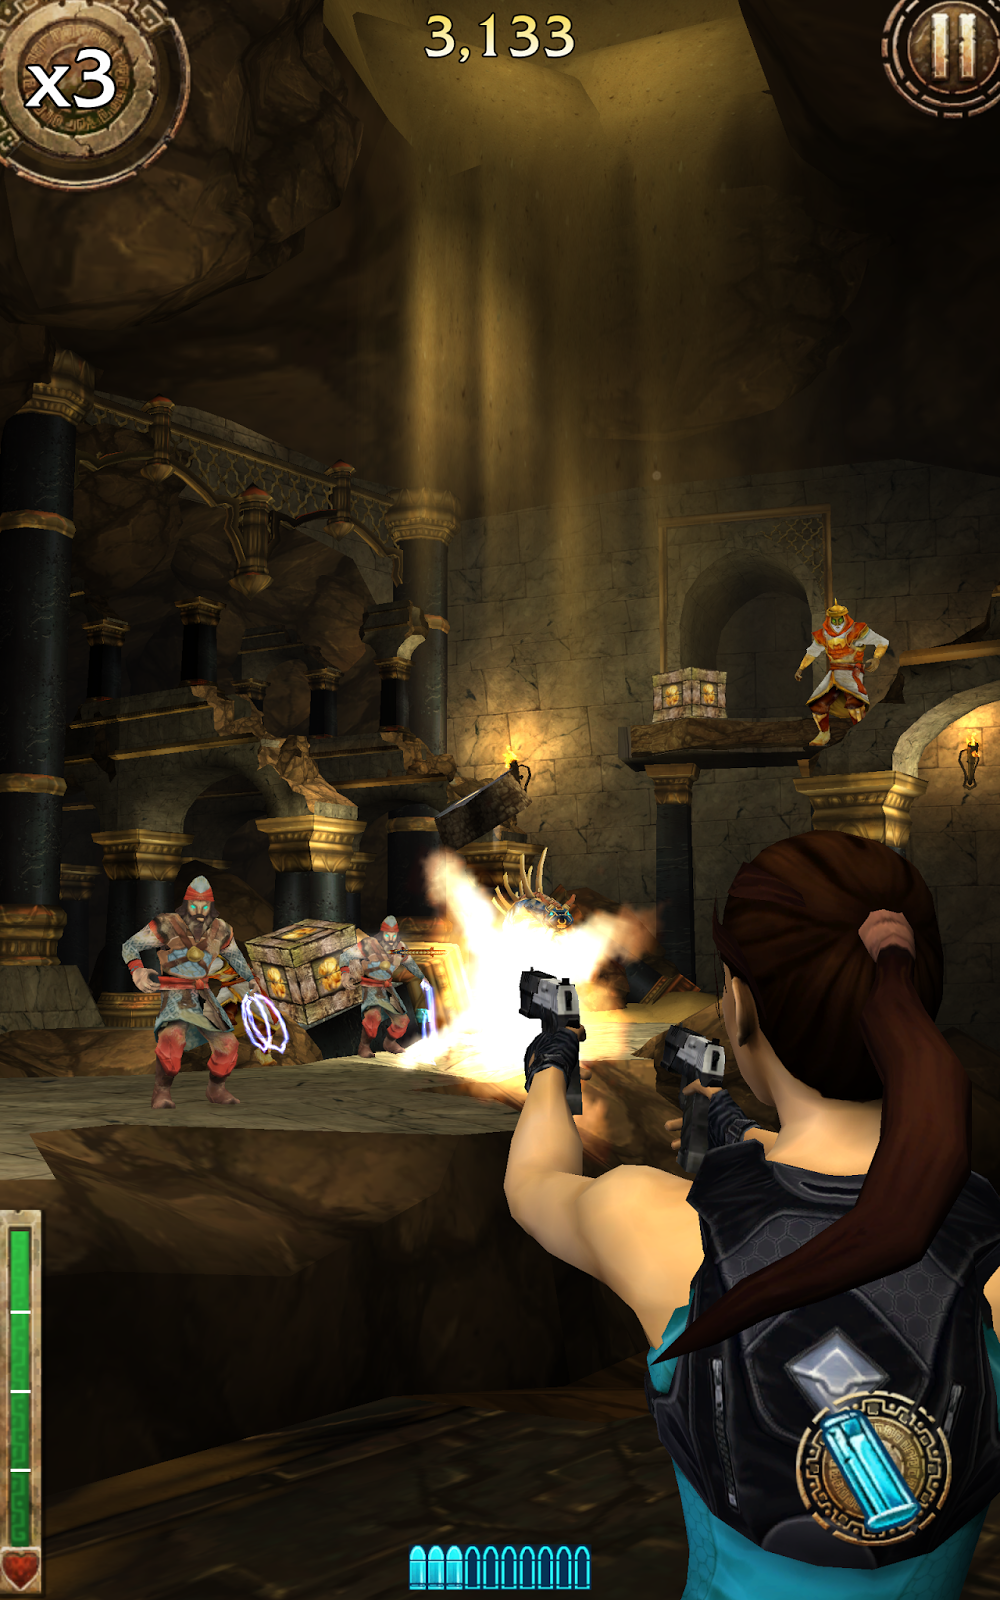 Lara Croft: Relic Run Preview - Lara Croft Does Her Best Temple Run  Impression In Relic Run On Mobile - Game Informer